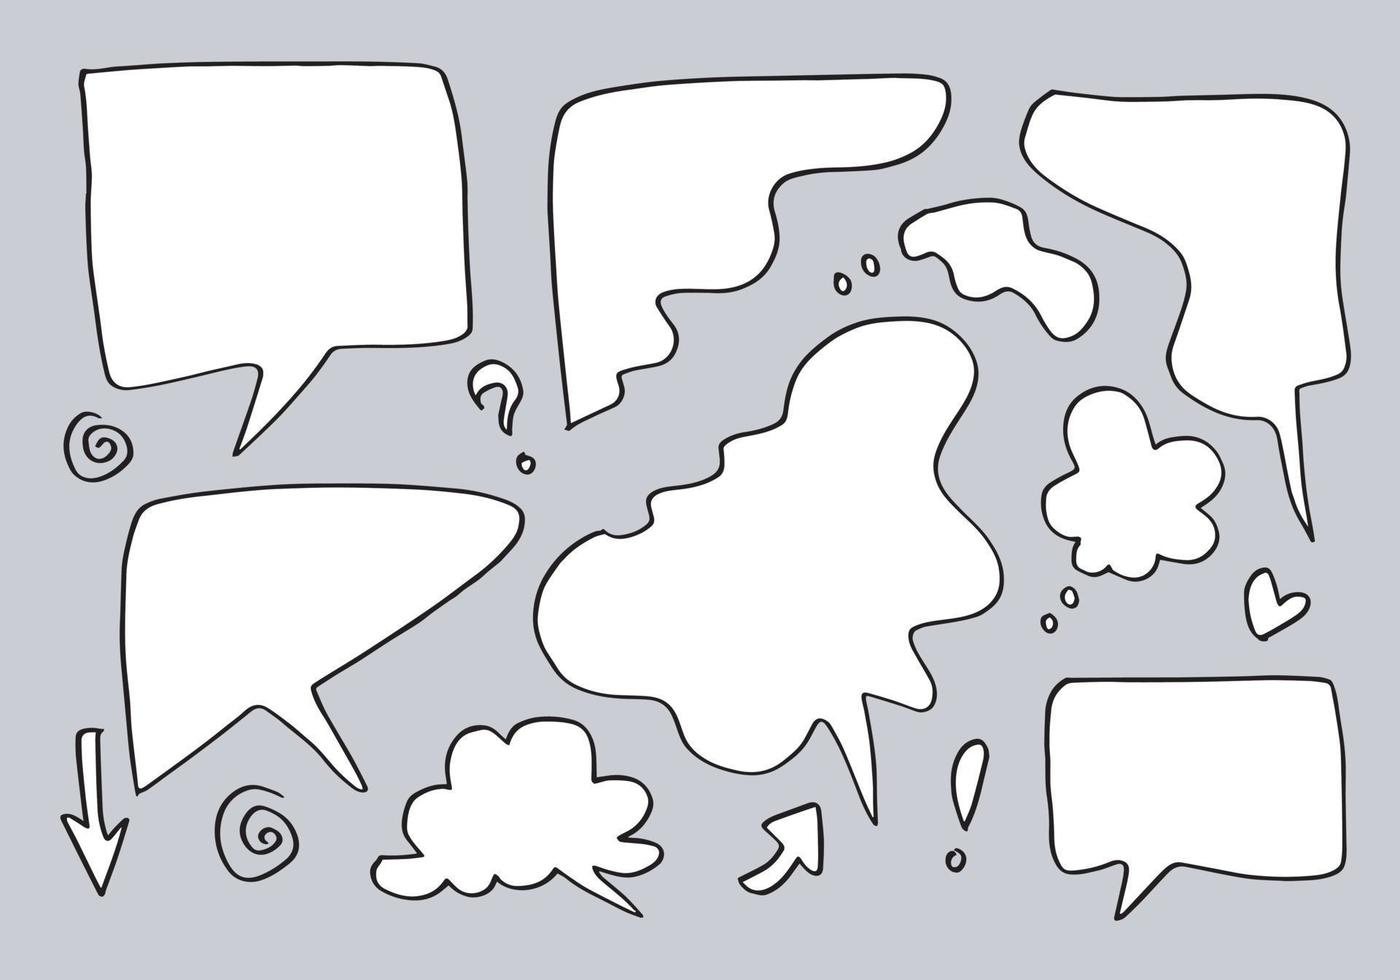 Hand drawn set of speech bubbles isolated on gray background.vector illustration.eps 10. vector